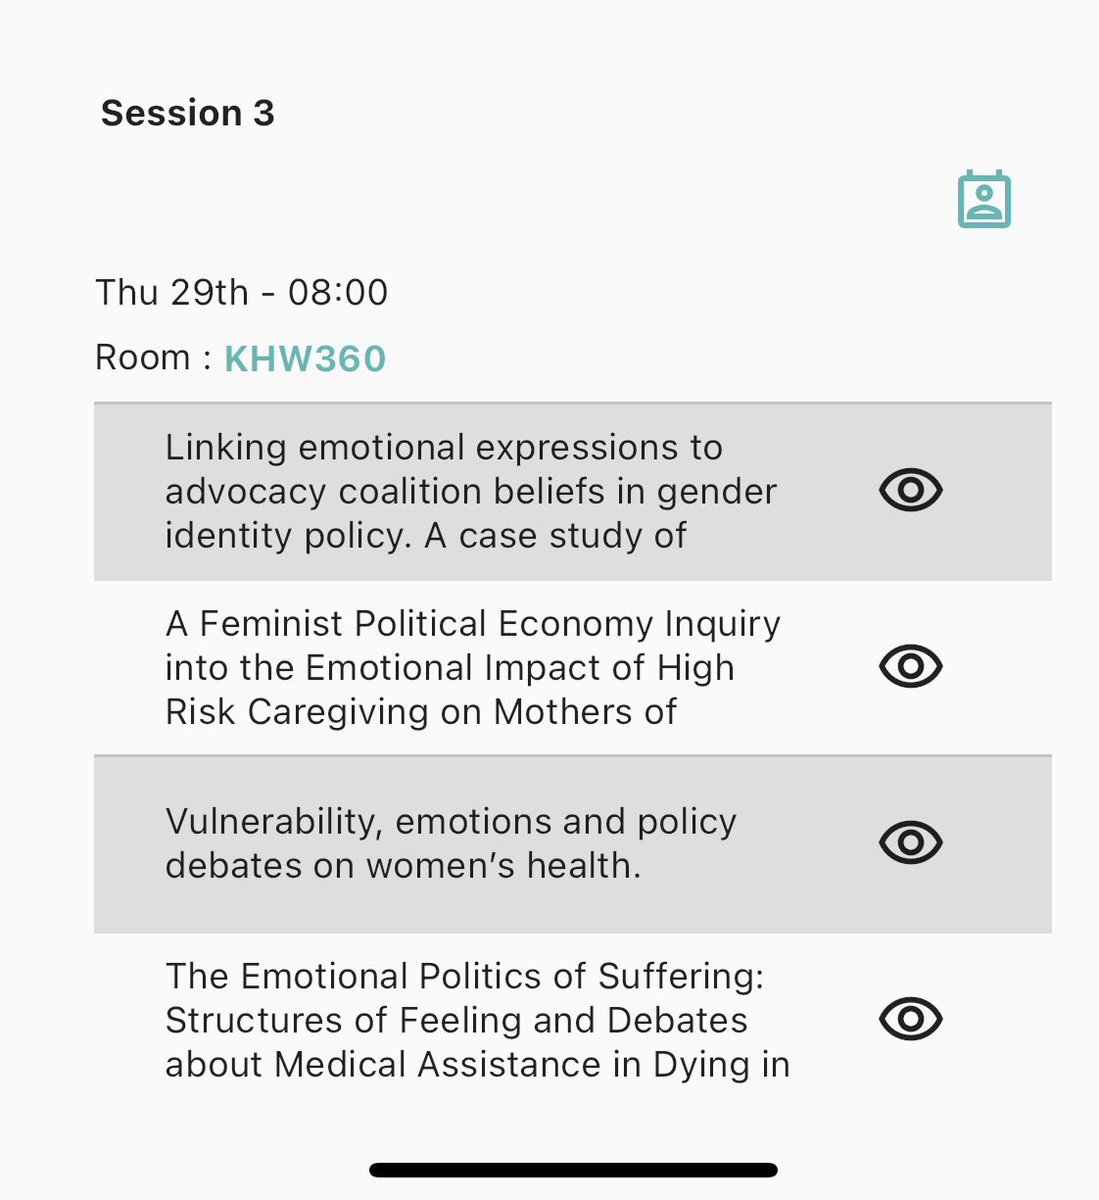 Toronto bound and super excited to convene with policy peeps @ #ICPP6
I’ll be sharing  new emotions work that offers theoretical contributions to the emotional expressions of allies and opponents in gender affirming care debates within advocacy coalitions. Join us Thursday AM!